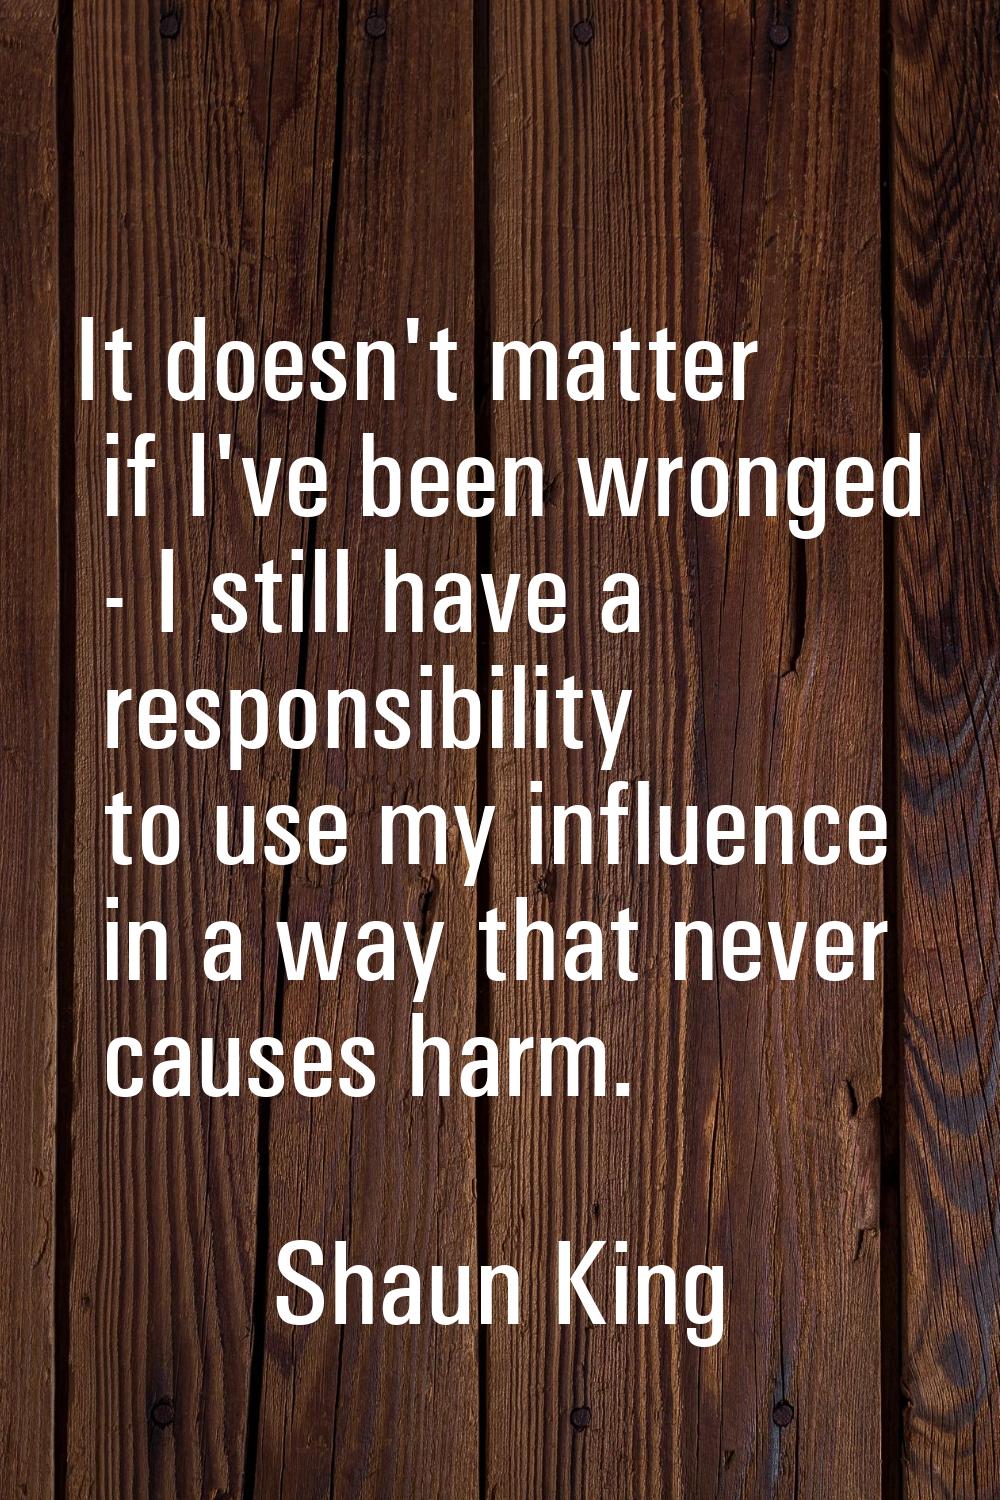 It doesn't matter if I've been wronged - I still have a responsibility to use my influence in a way